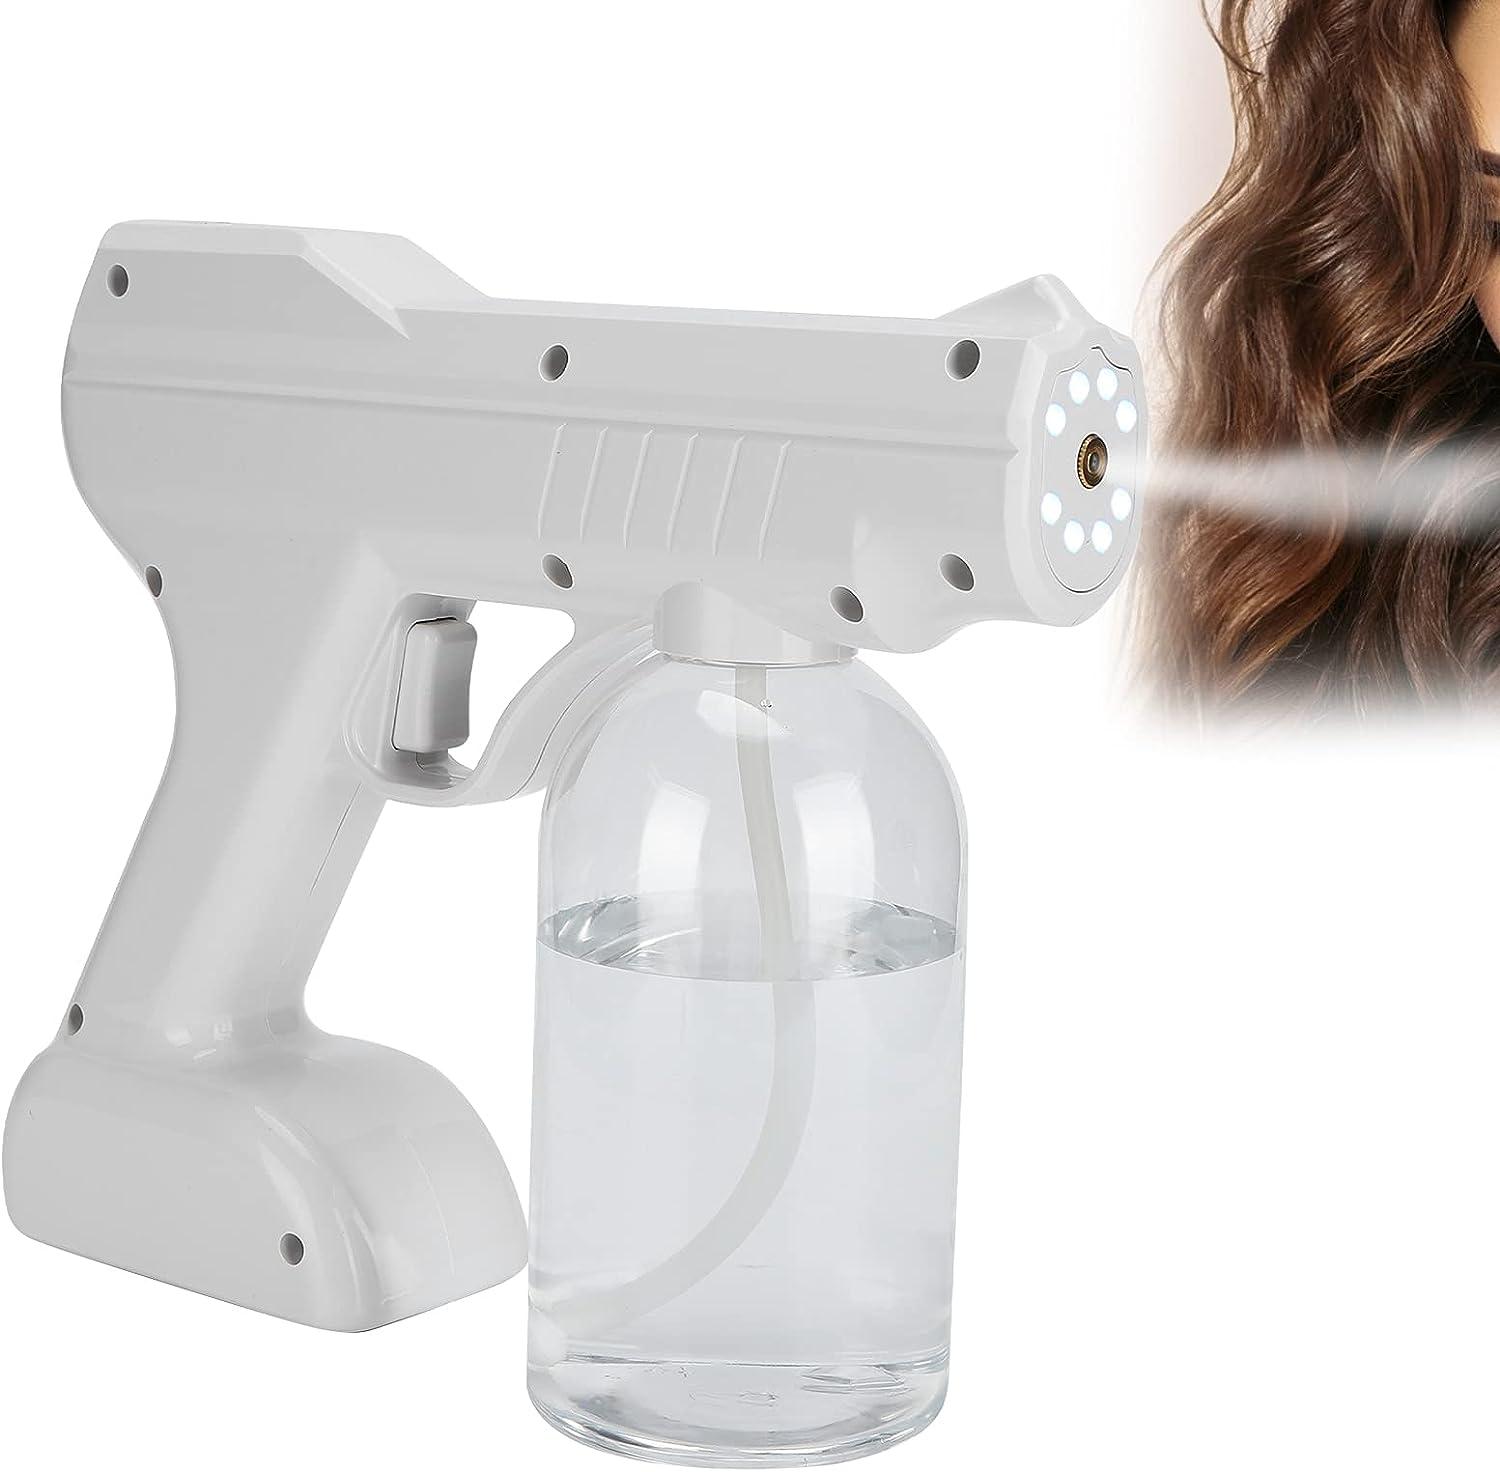 BHDK Nano Spray Gun 800Ml Portable Rechargeable Handhled Hair Steamer  Atomizer Large Volume Sprayer Machine with 5200Mah Battery for Barber Shops  Salons Hotel Travel defult default